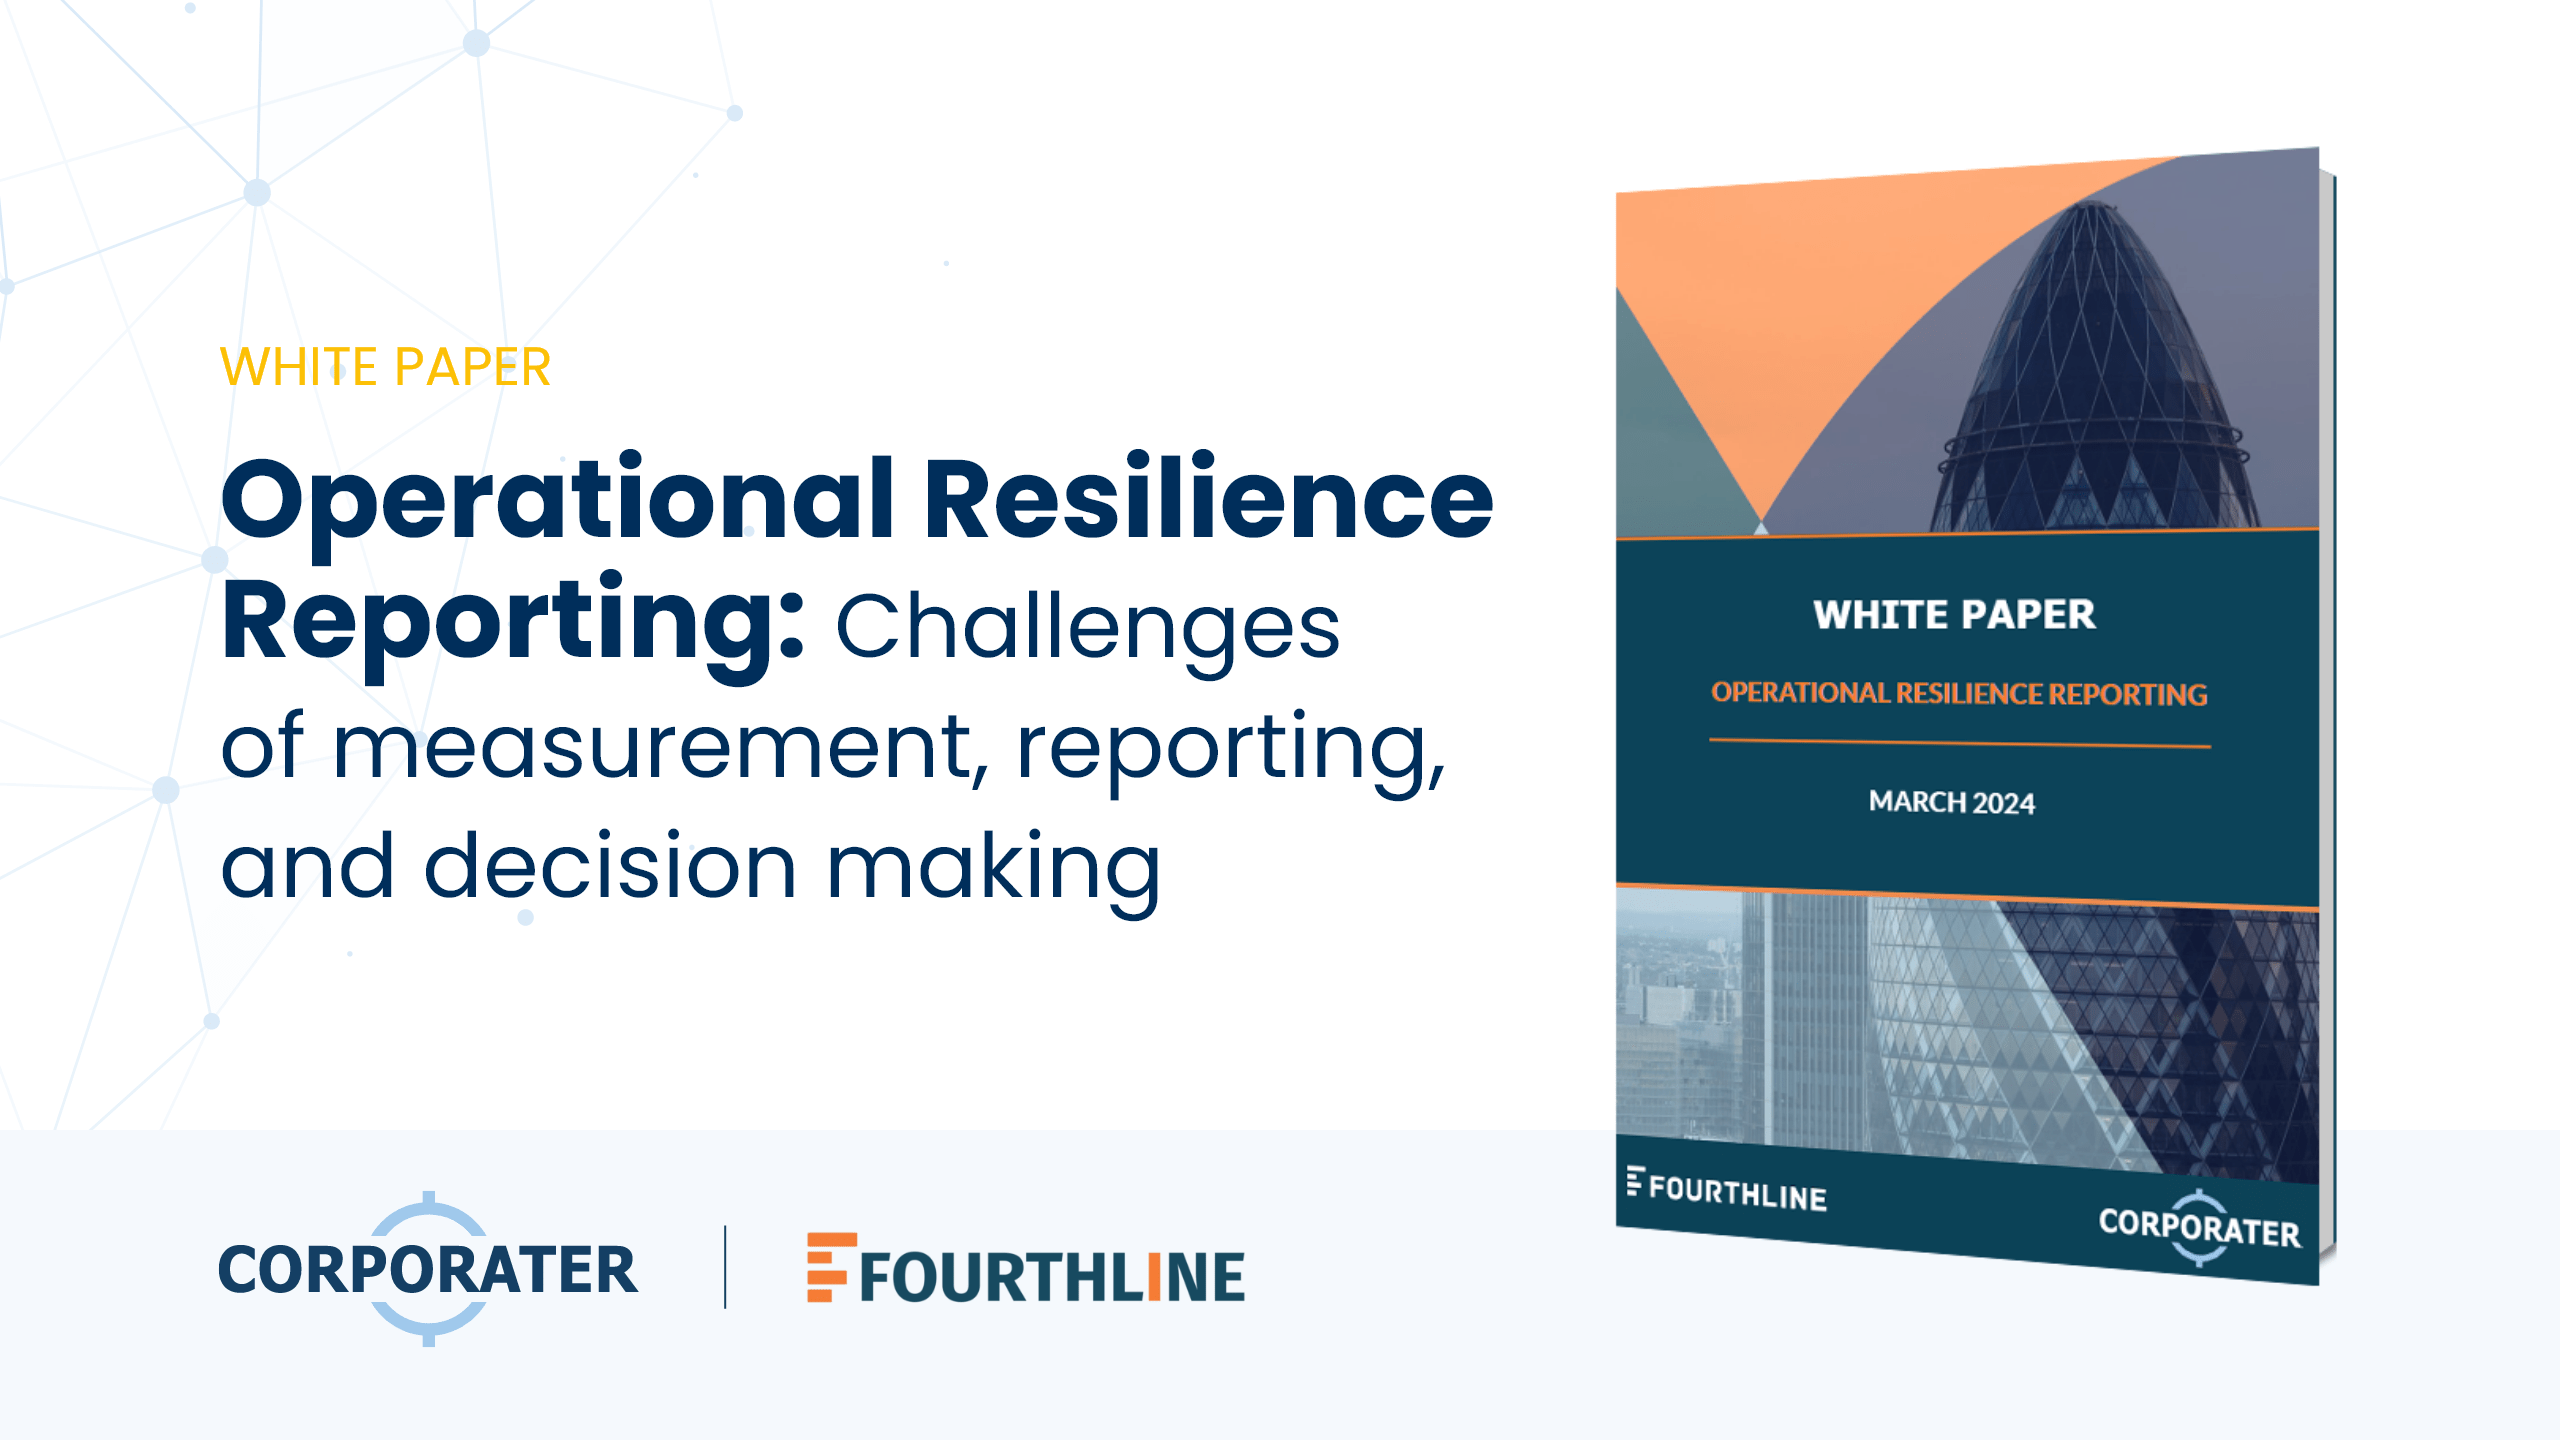 video-Operational-Resilience-Reporting-Challenges-measurement-reporting-decision-making